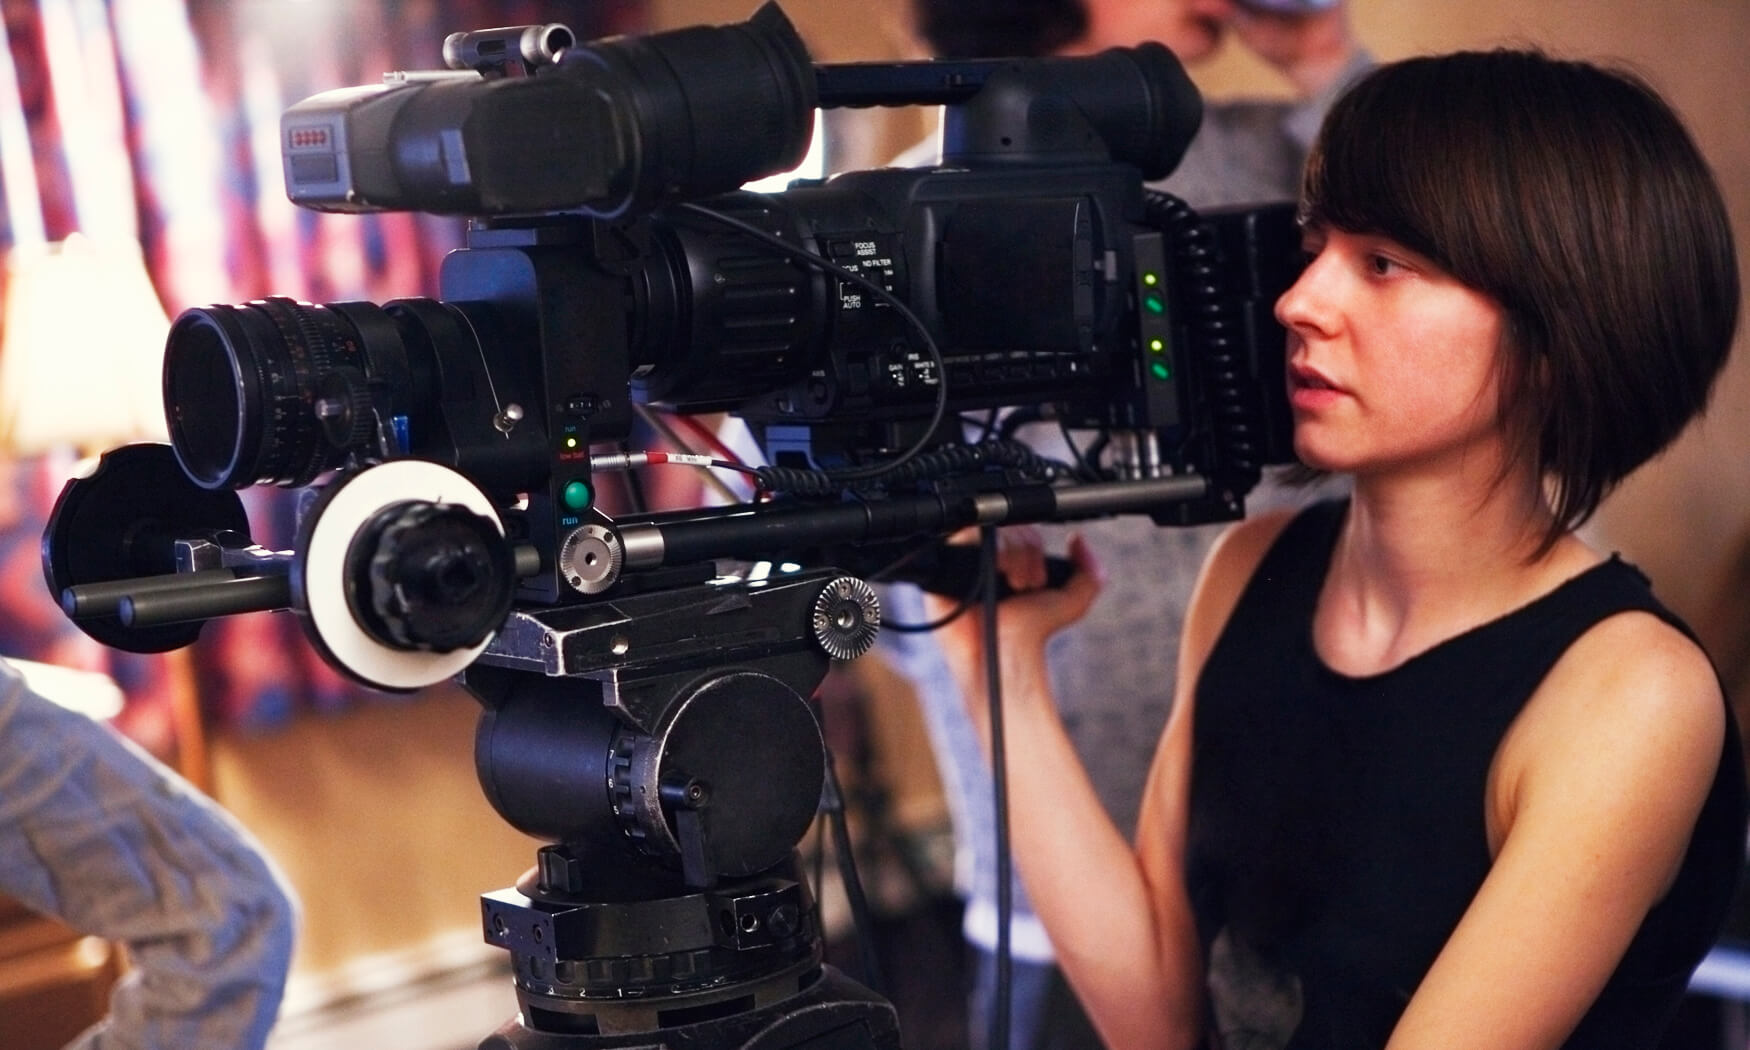 A young woman operating camera on a video shoot. Camera has a 35mm adaptor on it.